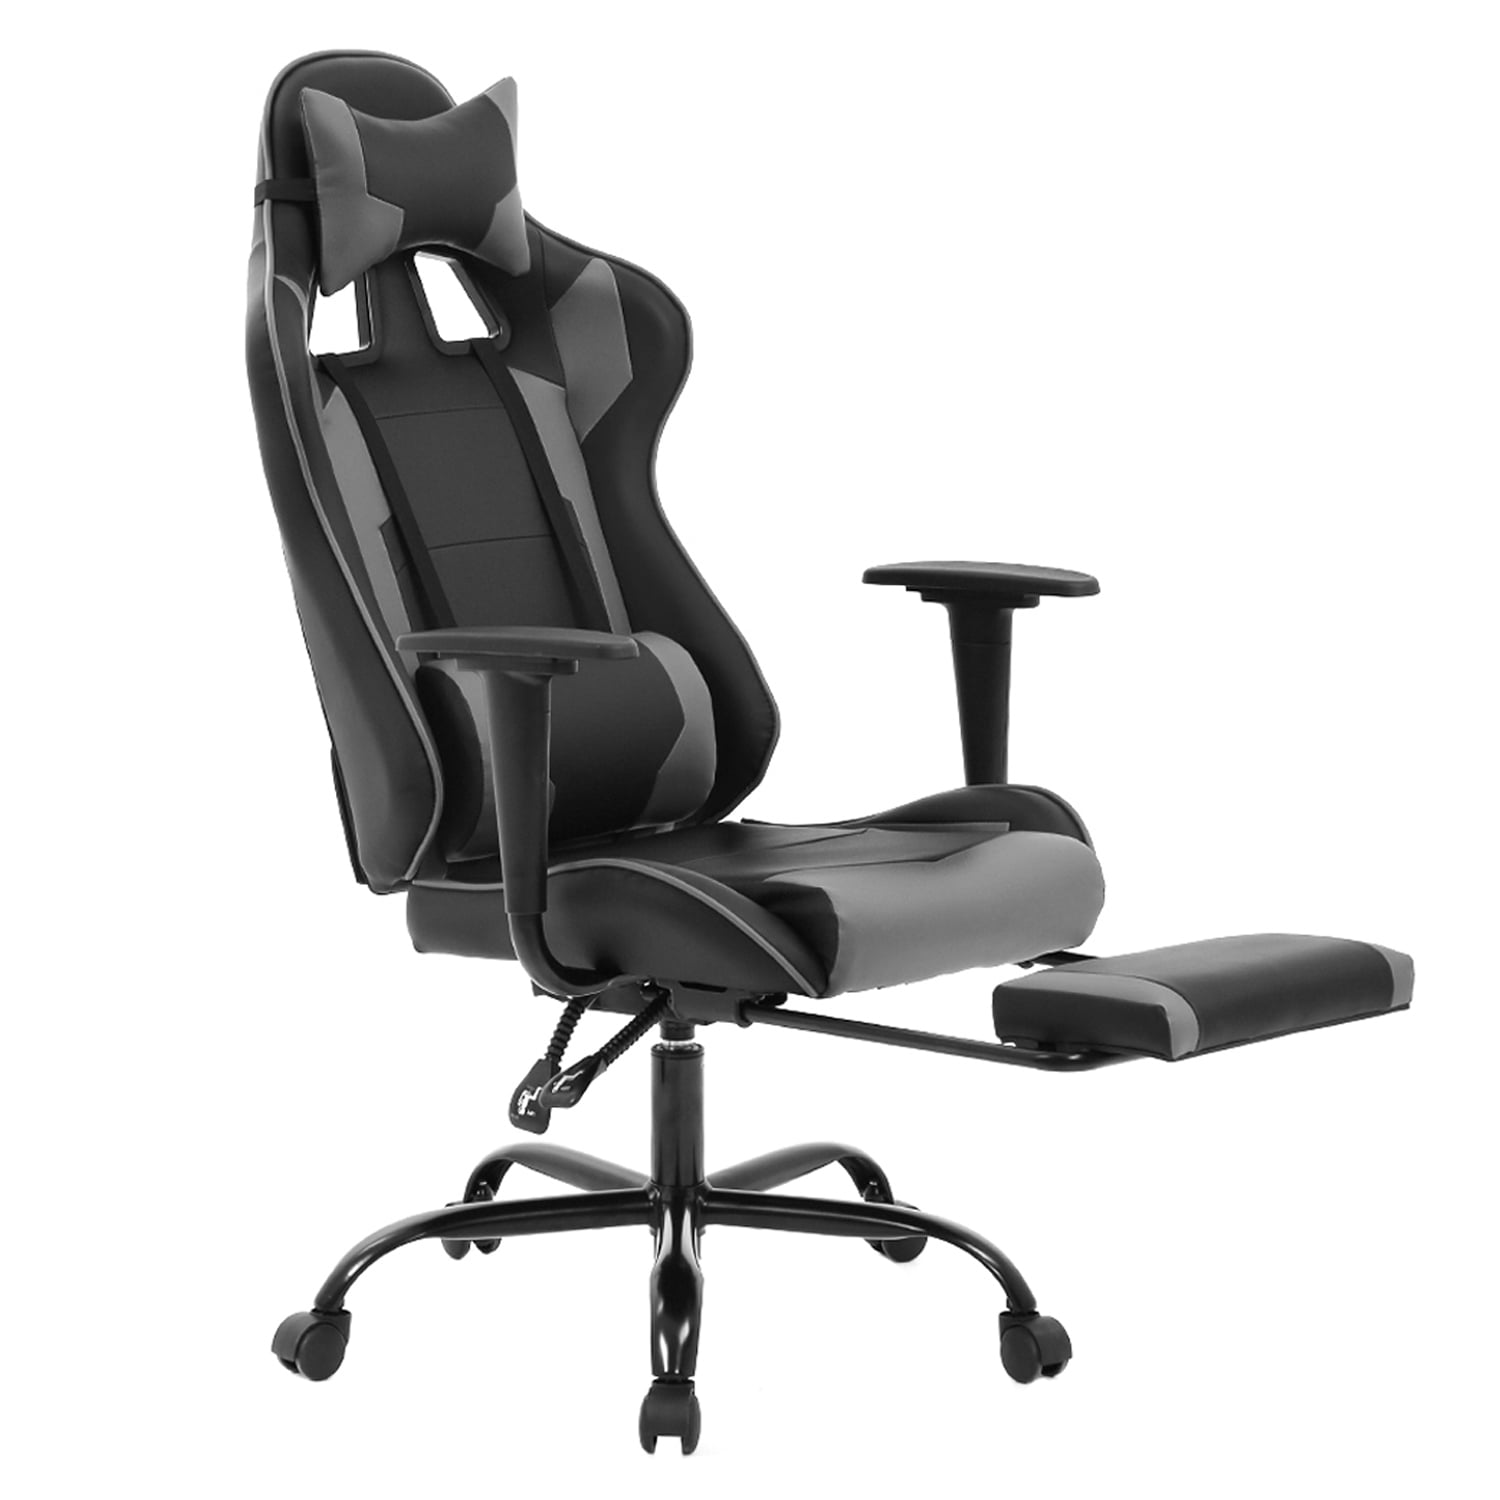 Details about   PC Gaming Chair Massage Office Chair Ergonomic Desk Chair Adjustable PU Leather 